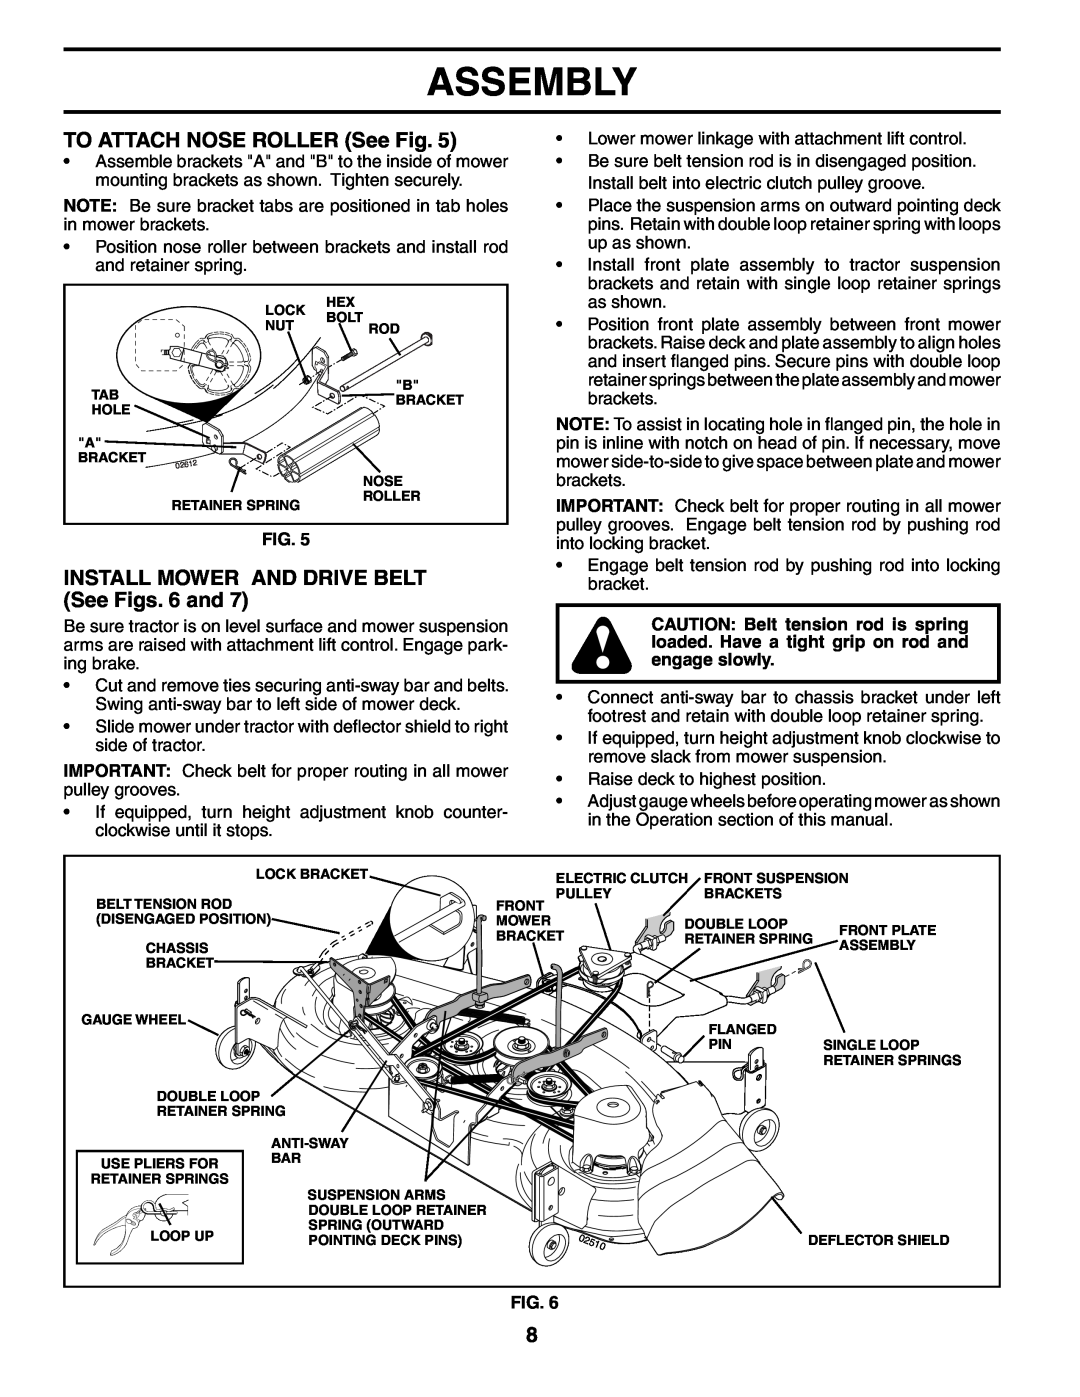 Poulan 187009 owner manual TO ATTACH NOSE ROLLER See Fig, INSTALL MOWER AND DRIVE BELT See Figs. 6 and, Assembly 